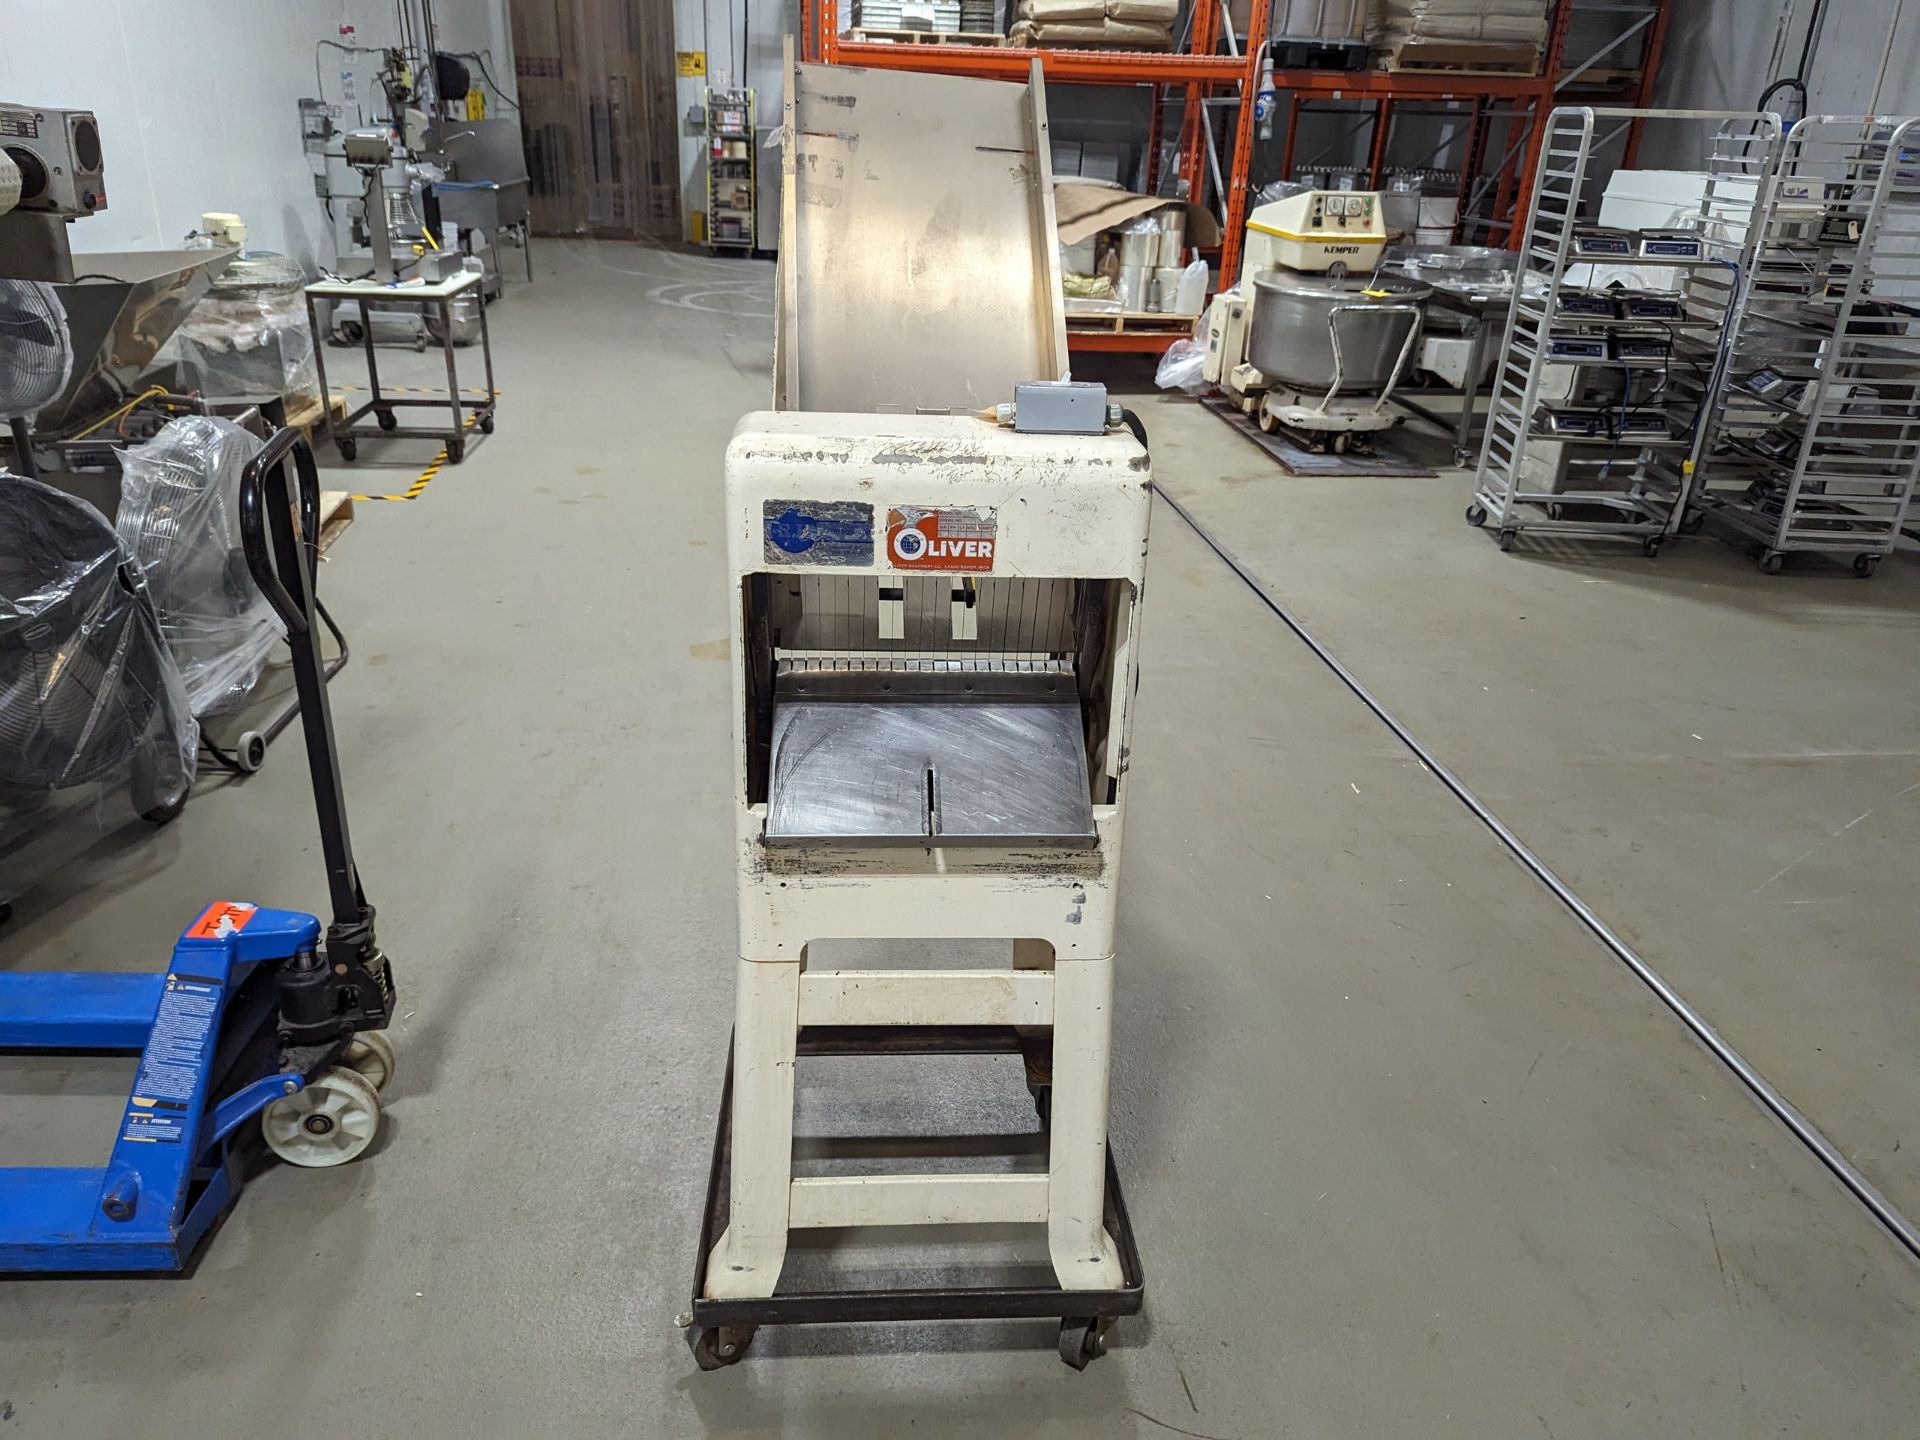 Oliver Bread Slicer for 3/4" Slices, Dimensions LxWxH: 52x25x63 - Image 2 of 5